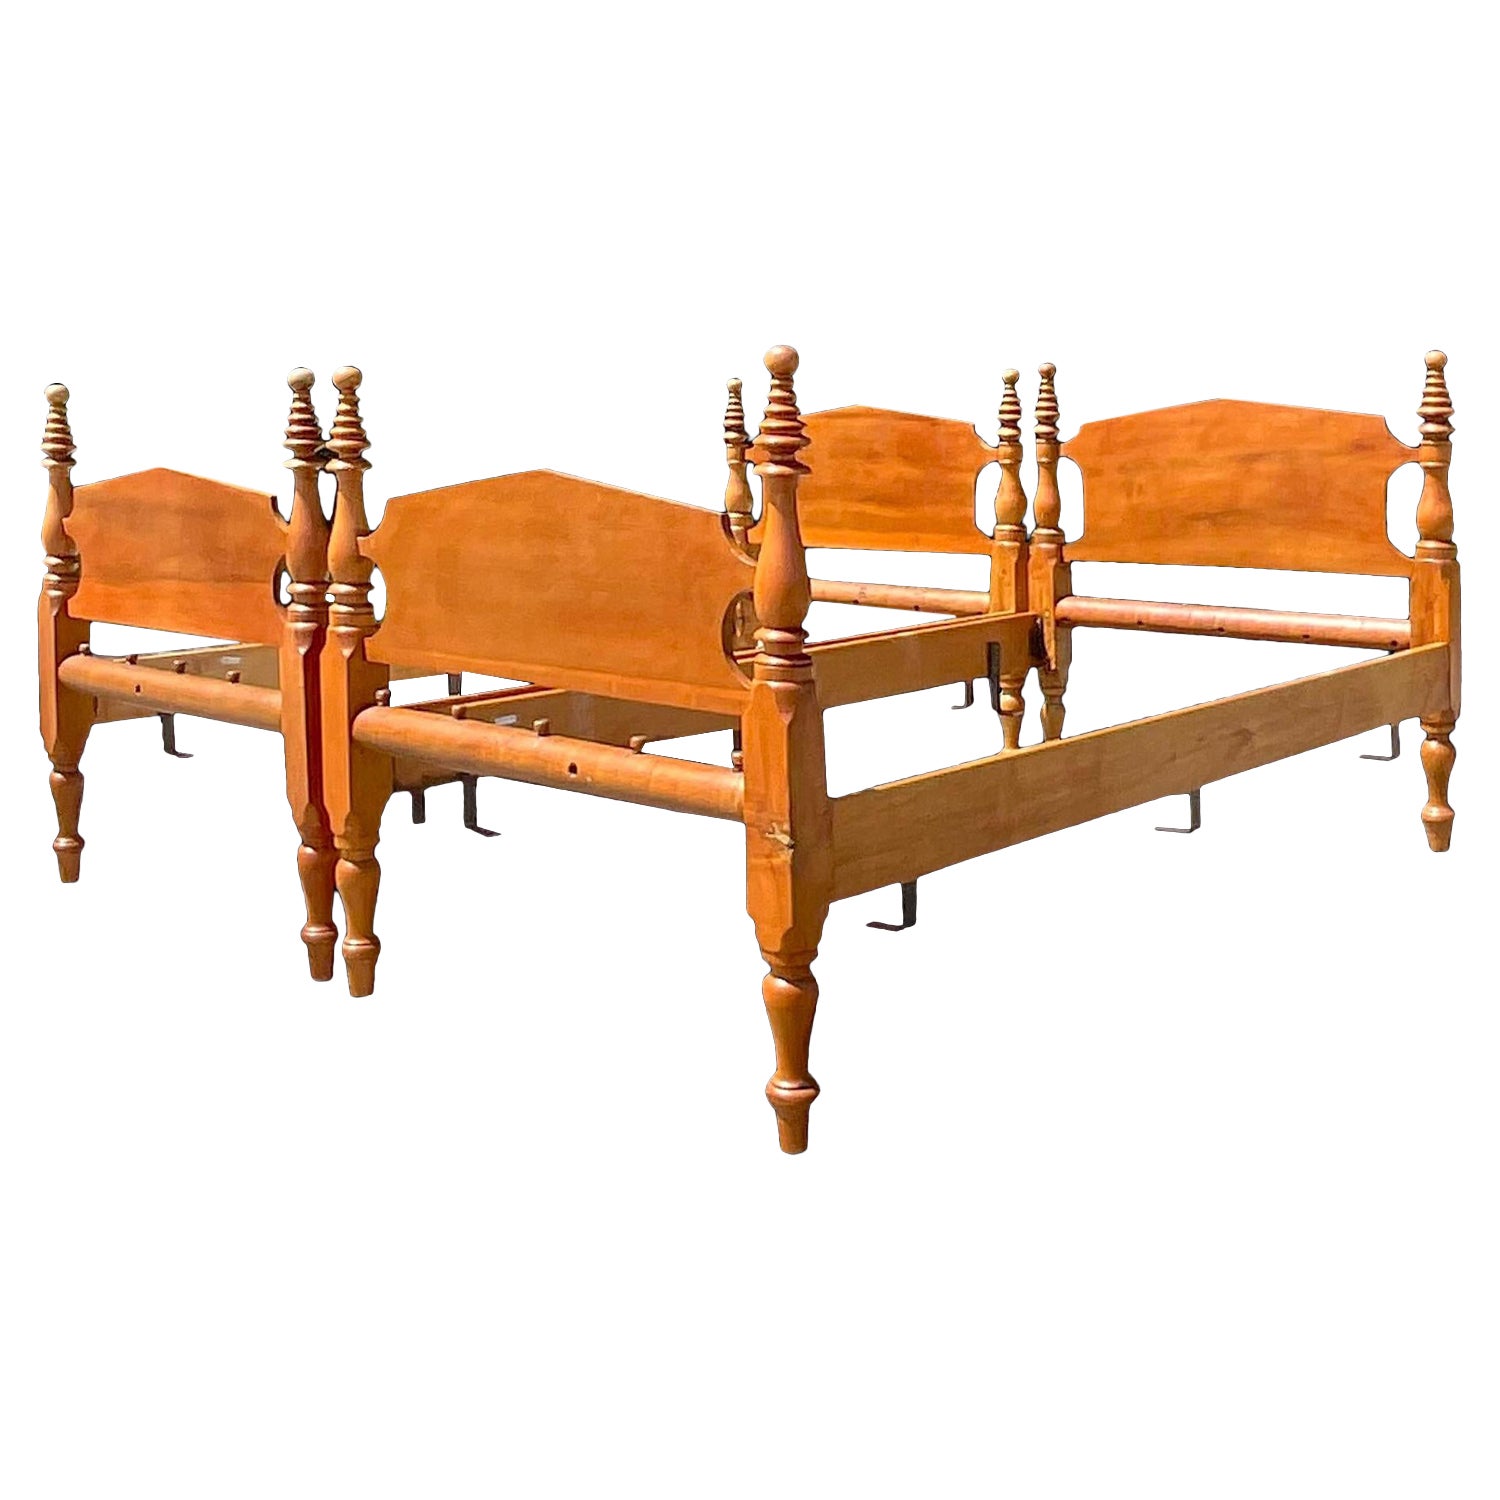 Mid 20th Century Vintage Boho Maple Cannonball Twin Beds - a Pair For Sale